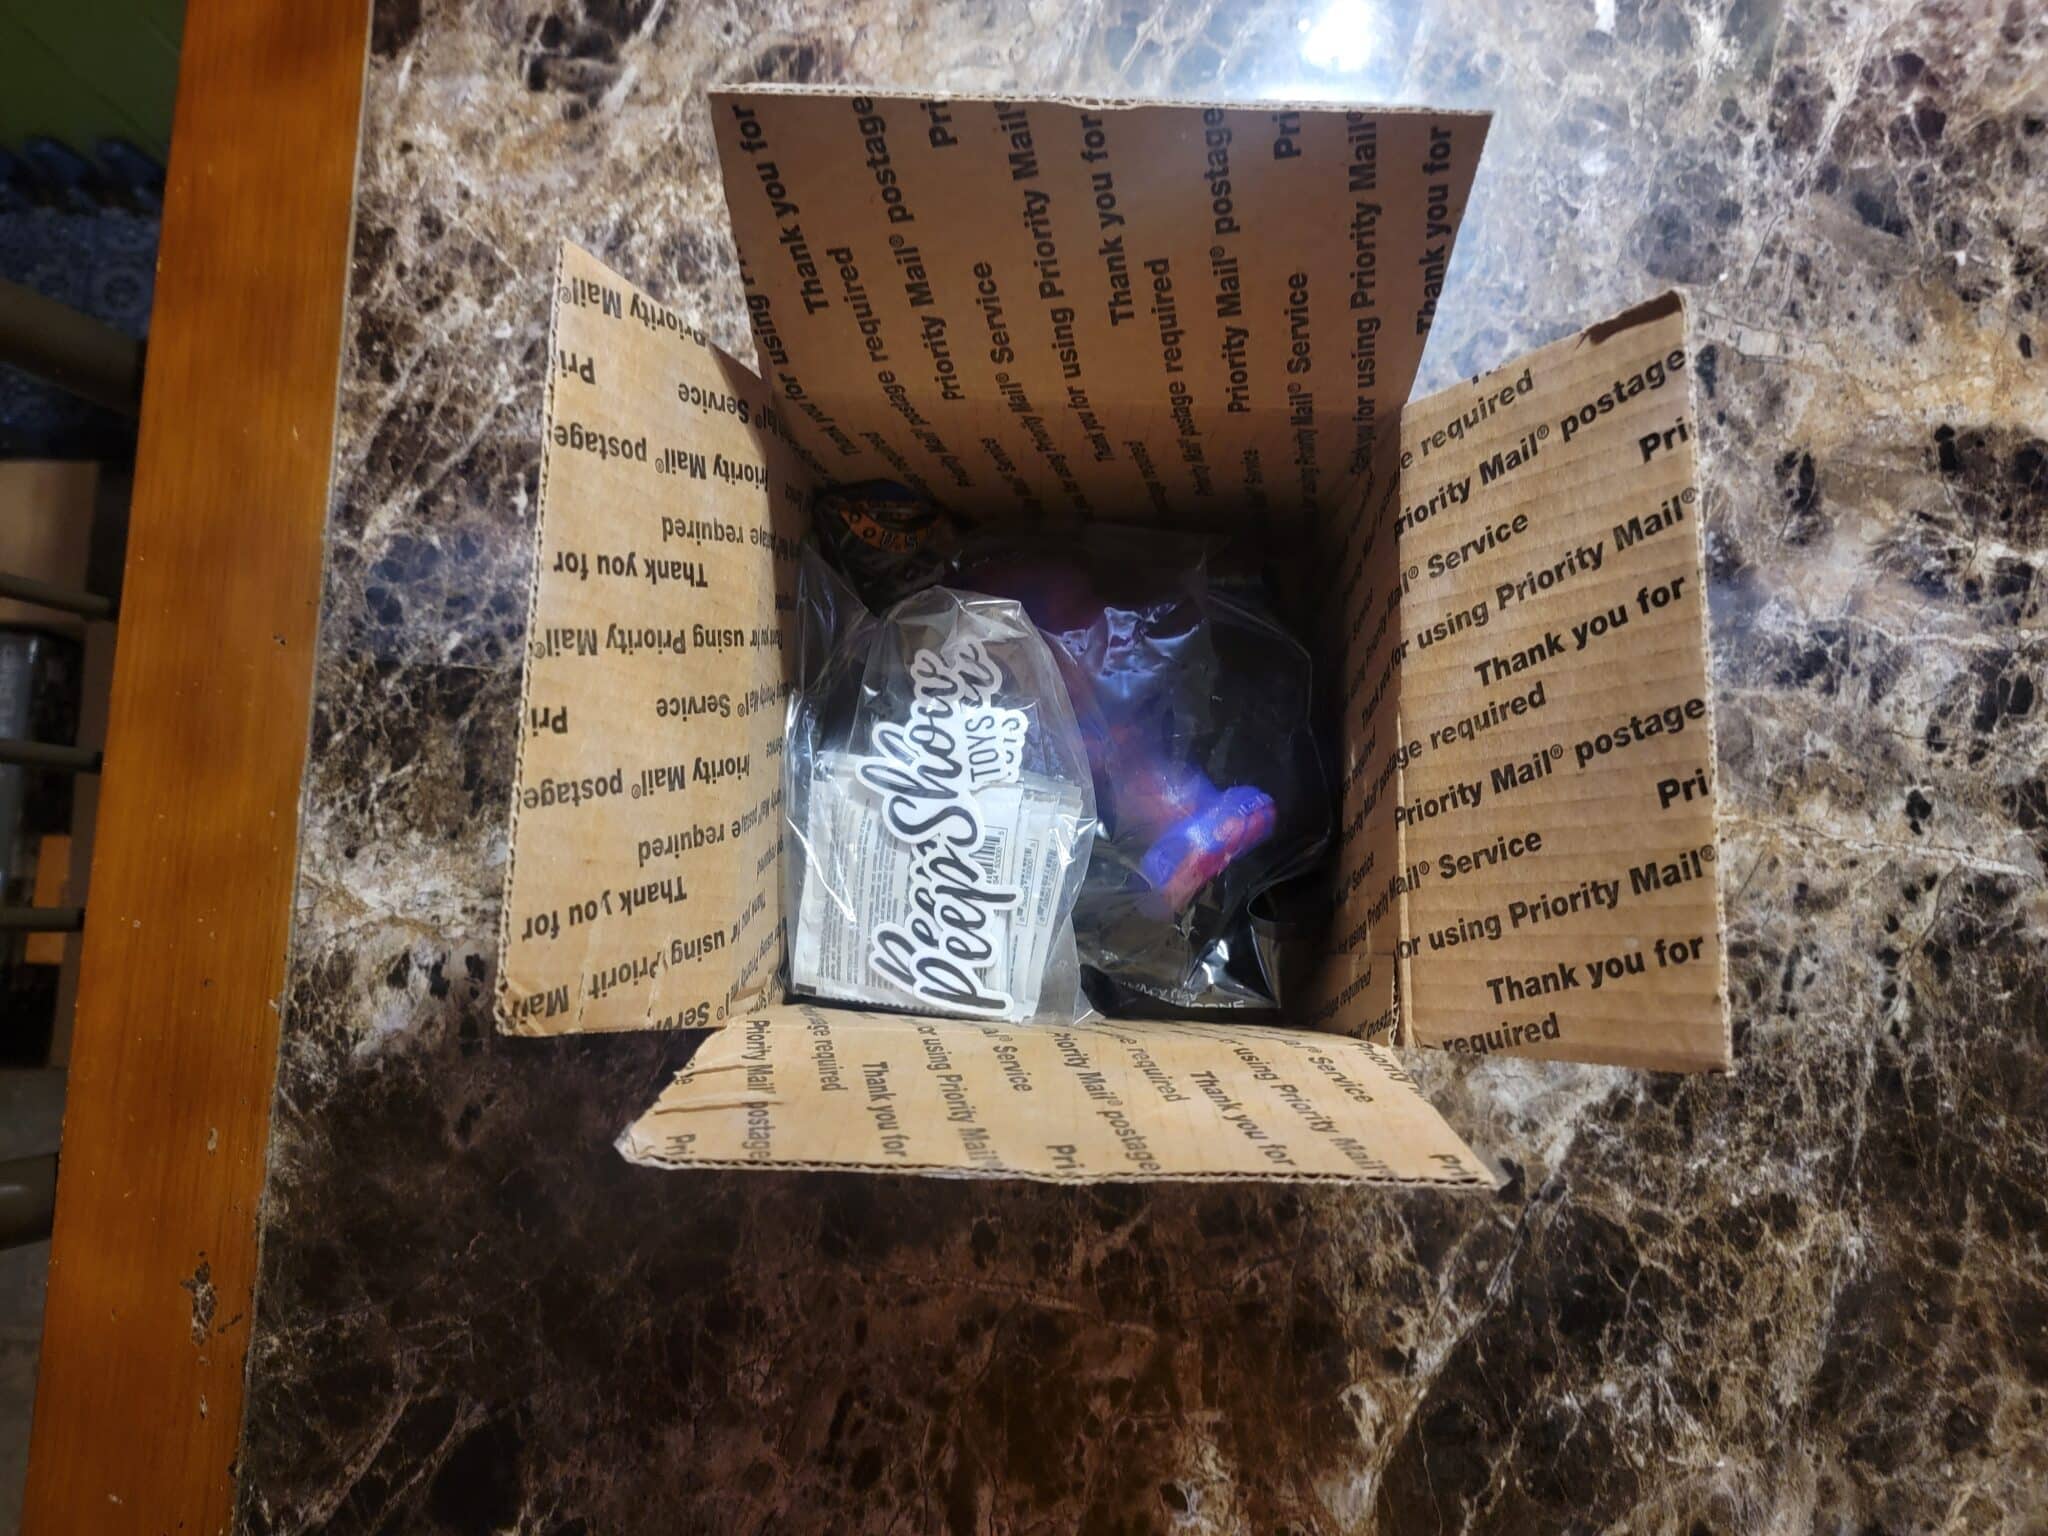 Oxballs Honcho, Size 3 Unwrapping Excitement: A Packaging Review